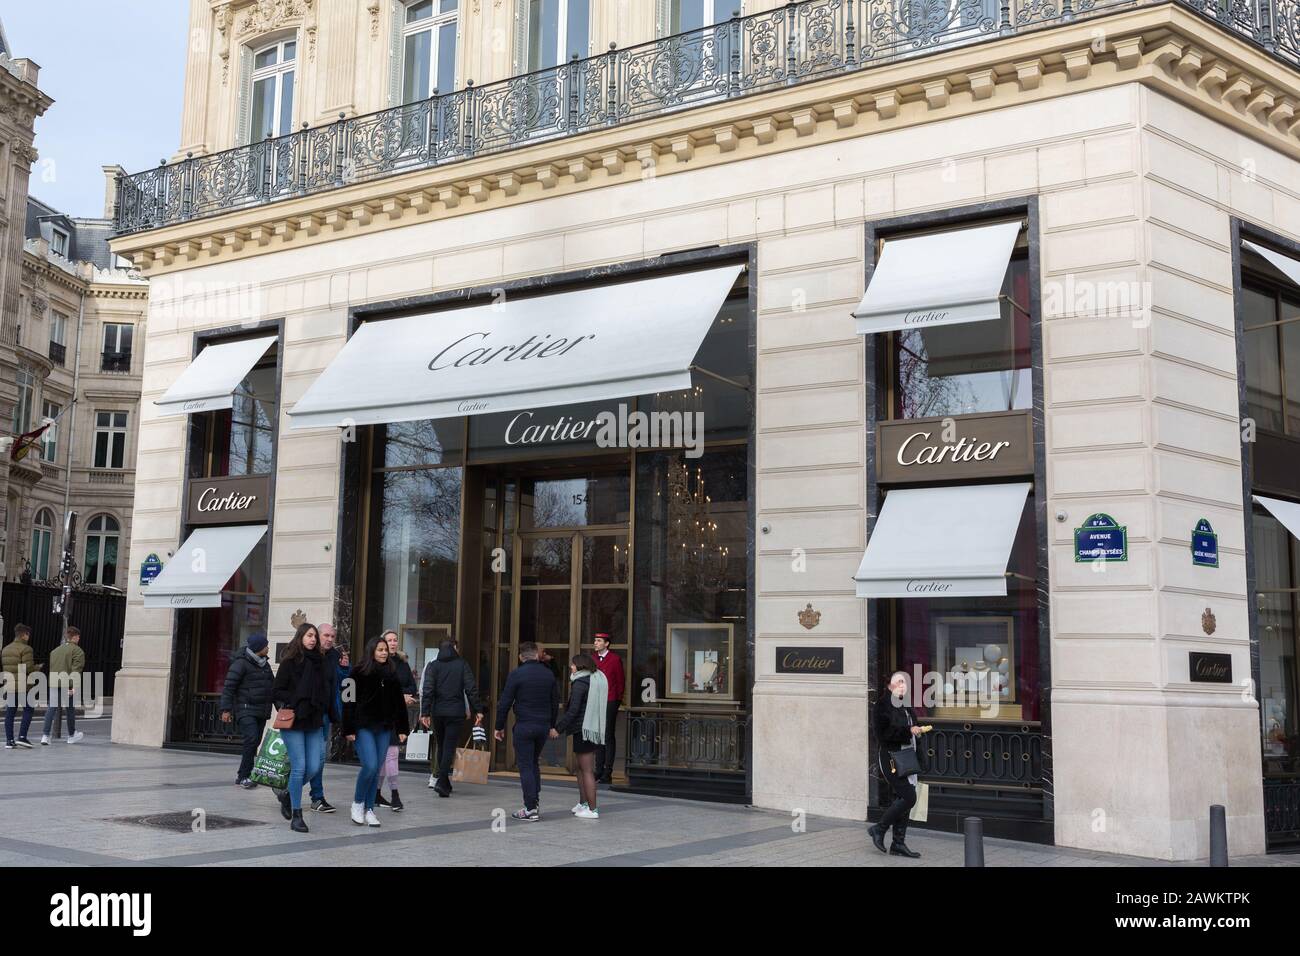 Side view on the Cartier store at the Champs-Elysées. People (shoppers?) with bags are walking by. The 'Cartier' brand belongs to Richemont Group. Stock Photo